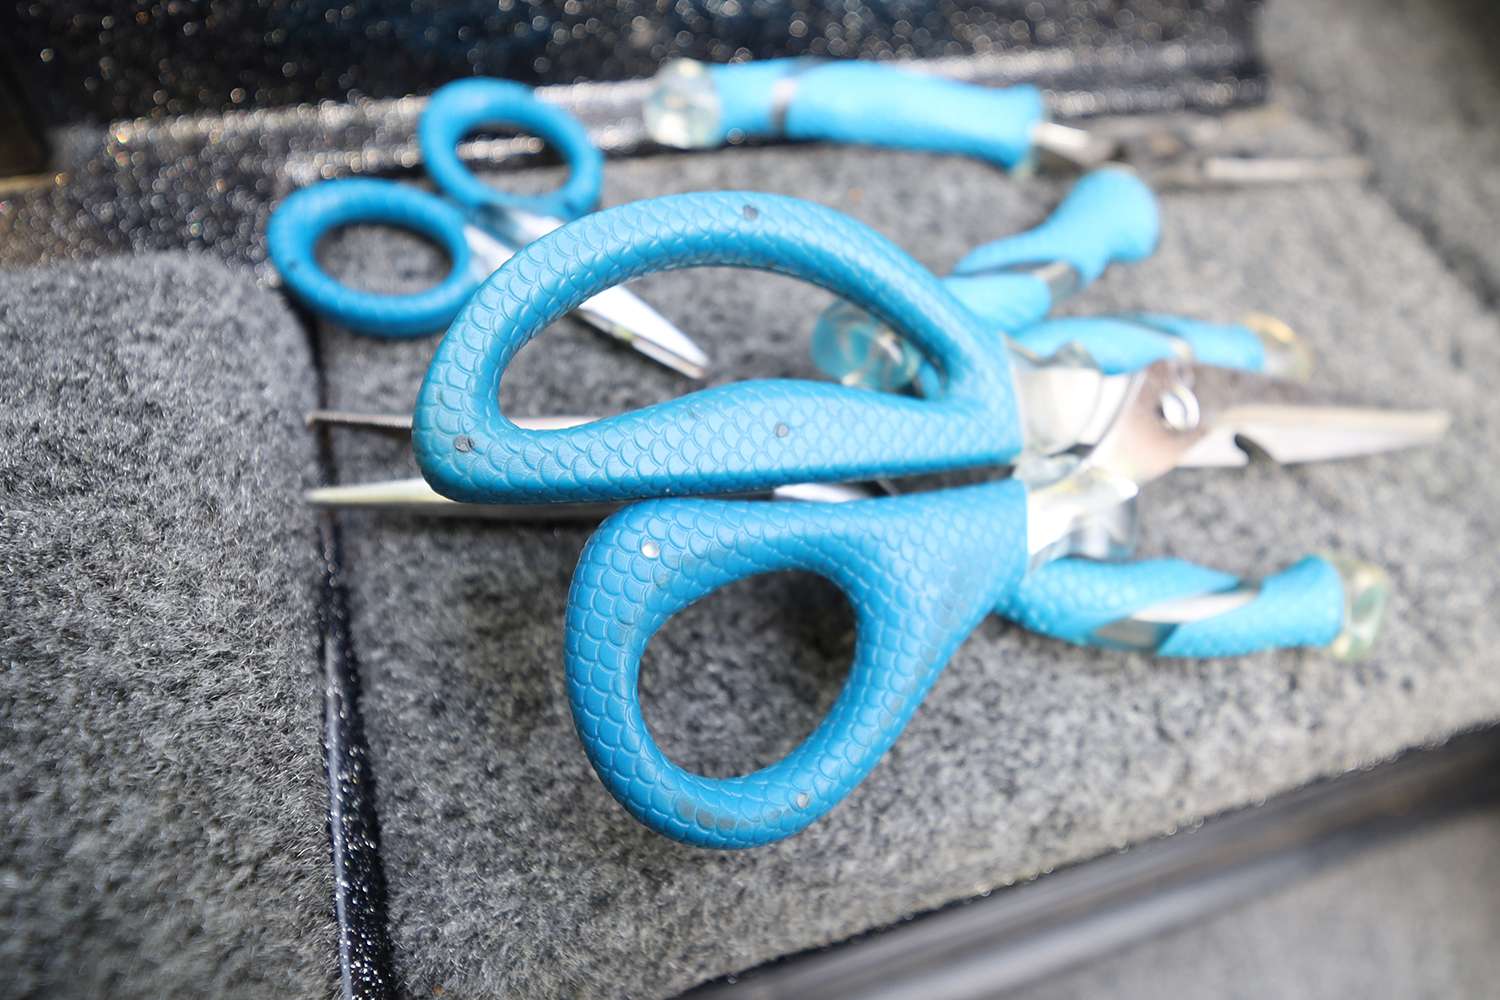 Like any busy angler, there are plenty of scissors and pliers nearby. 